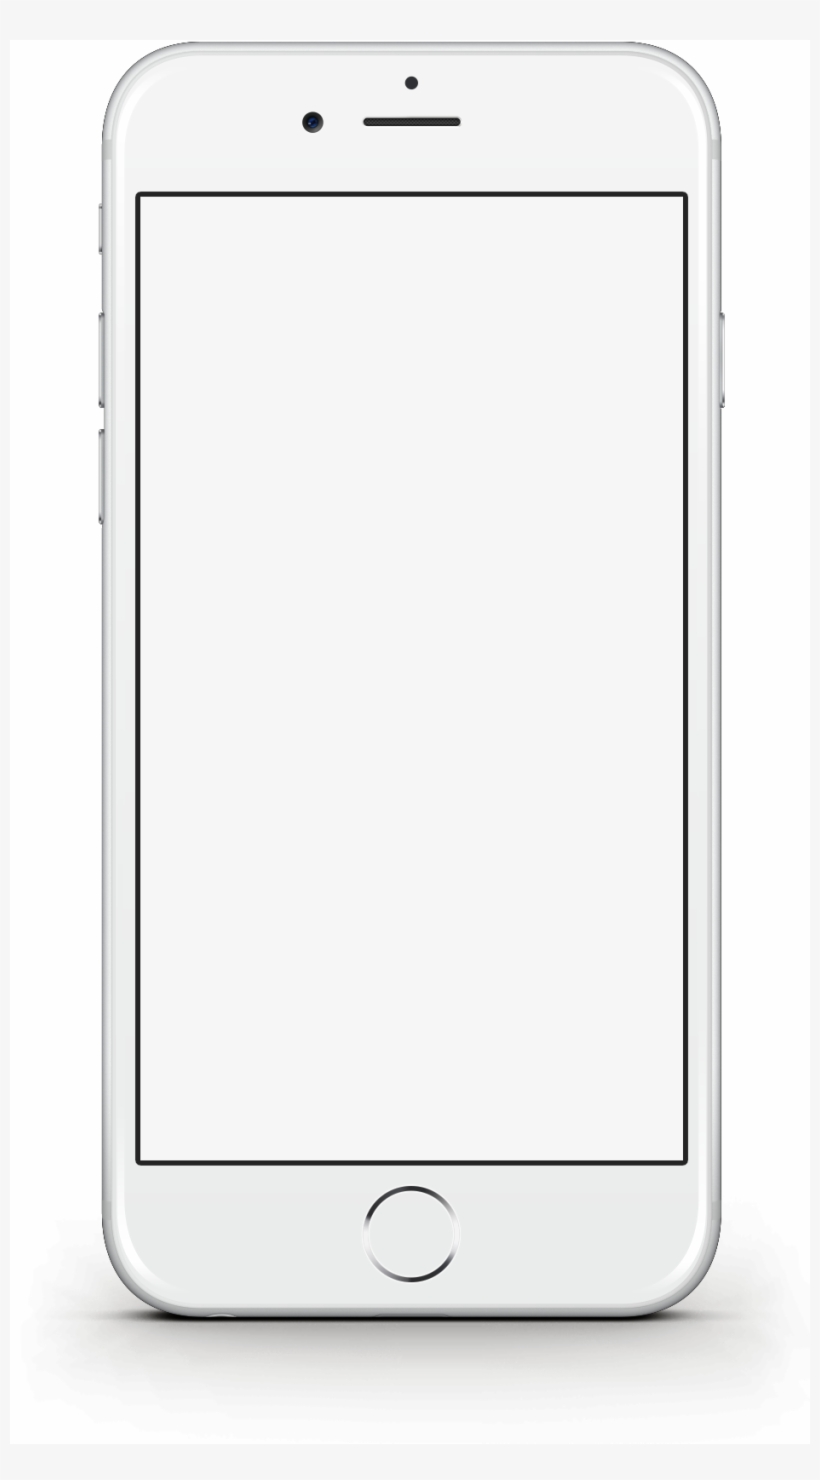 Iphone 6 Template Free Printable Templates